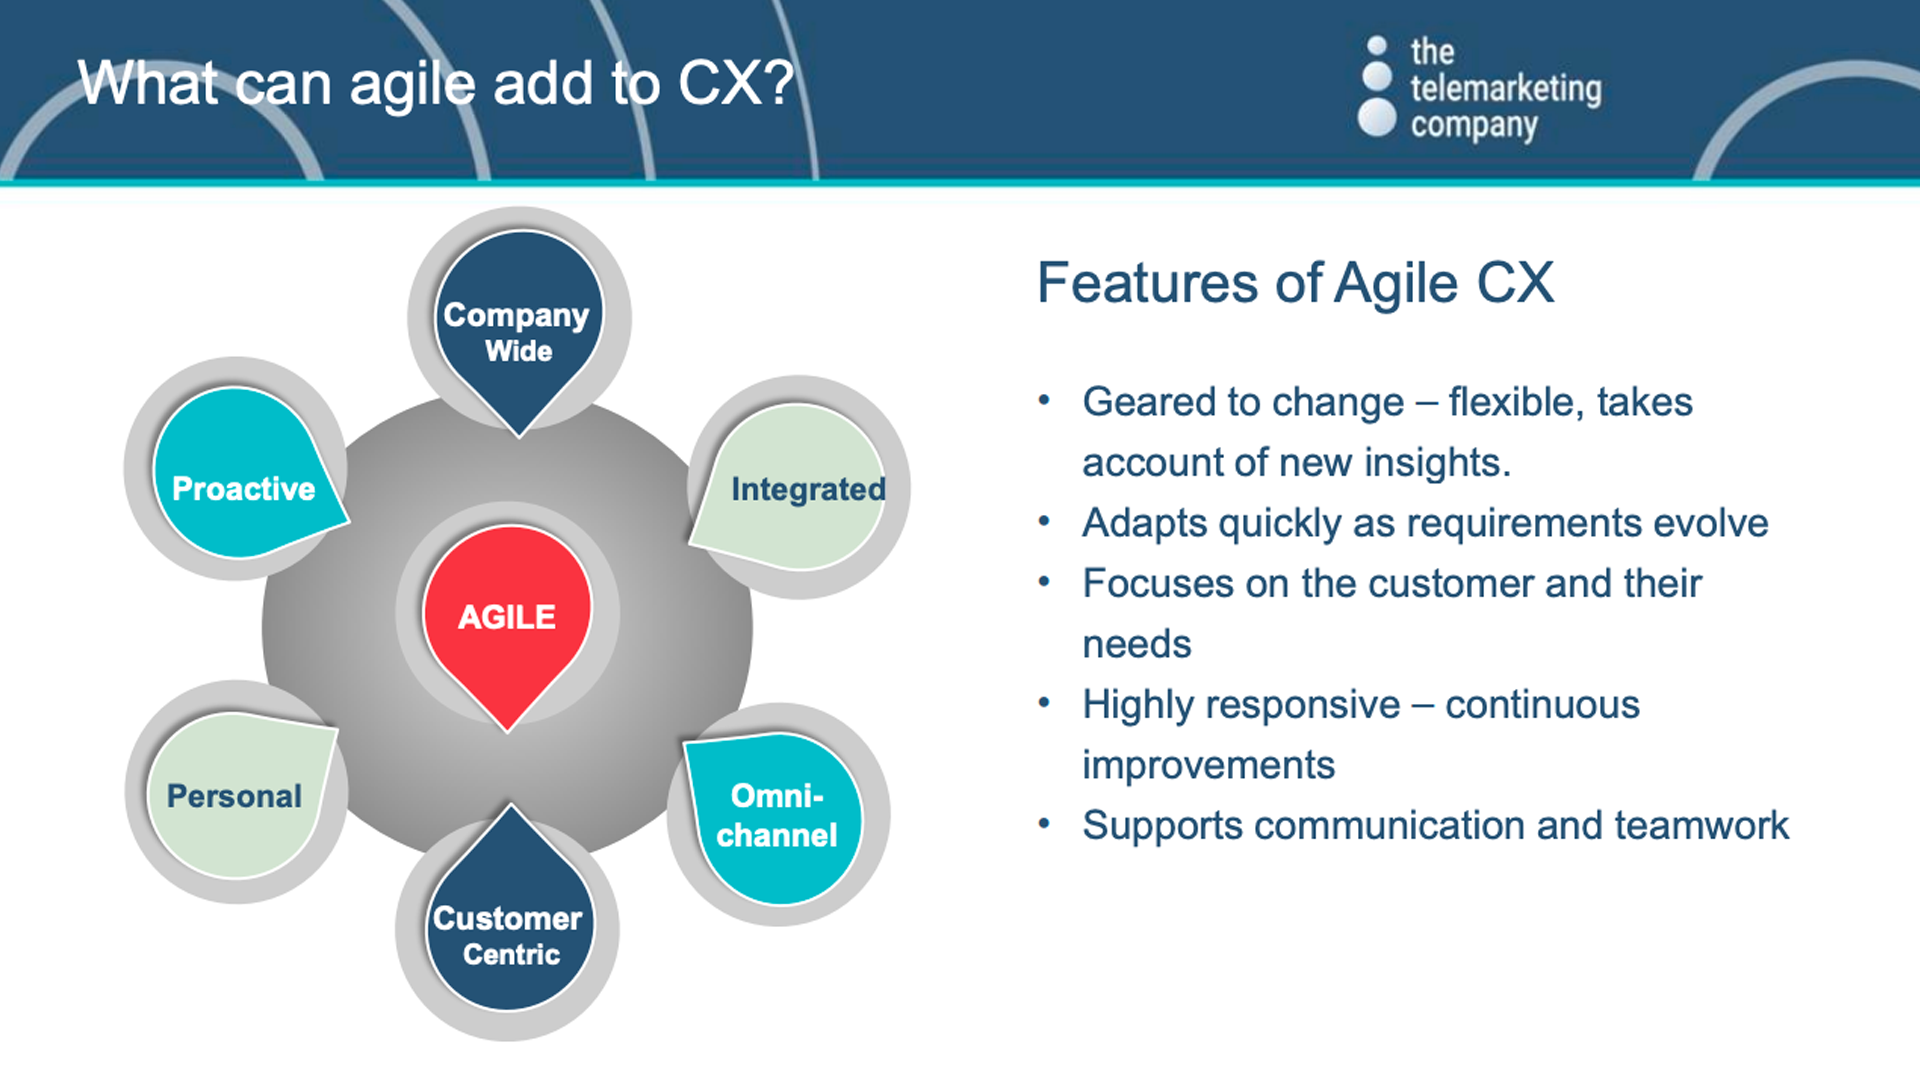 The Telemarketing Company slide - Features of Agile CX include: Geared to change, adapts quickly, focuses on the customer and highly responsive.